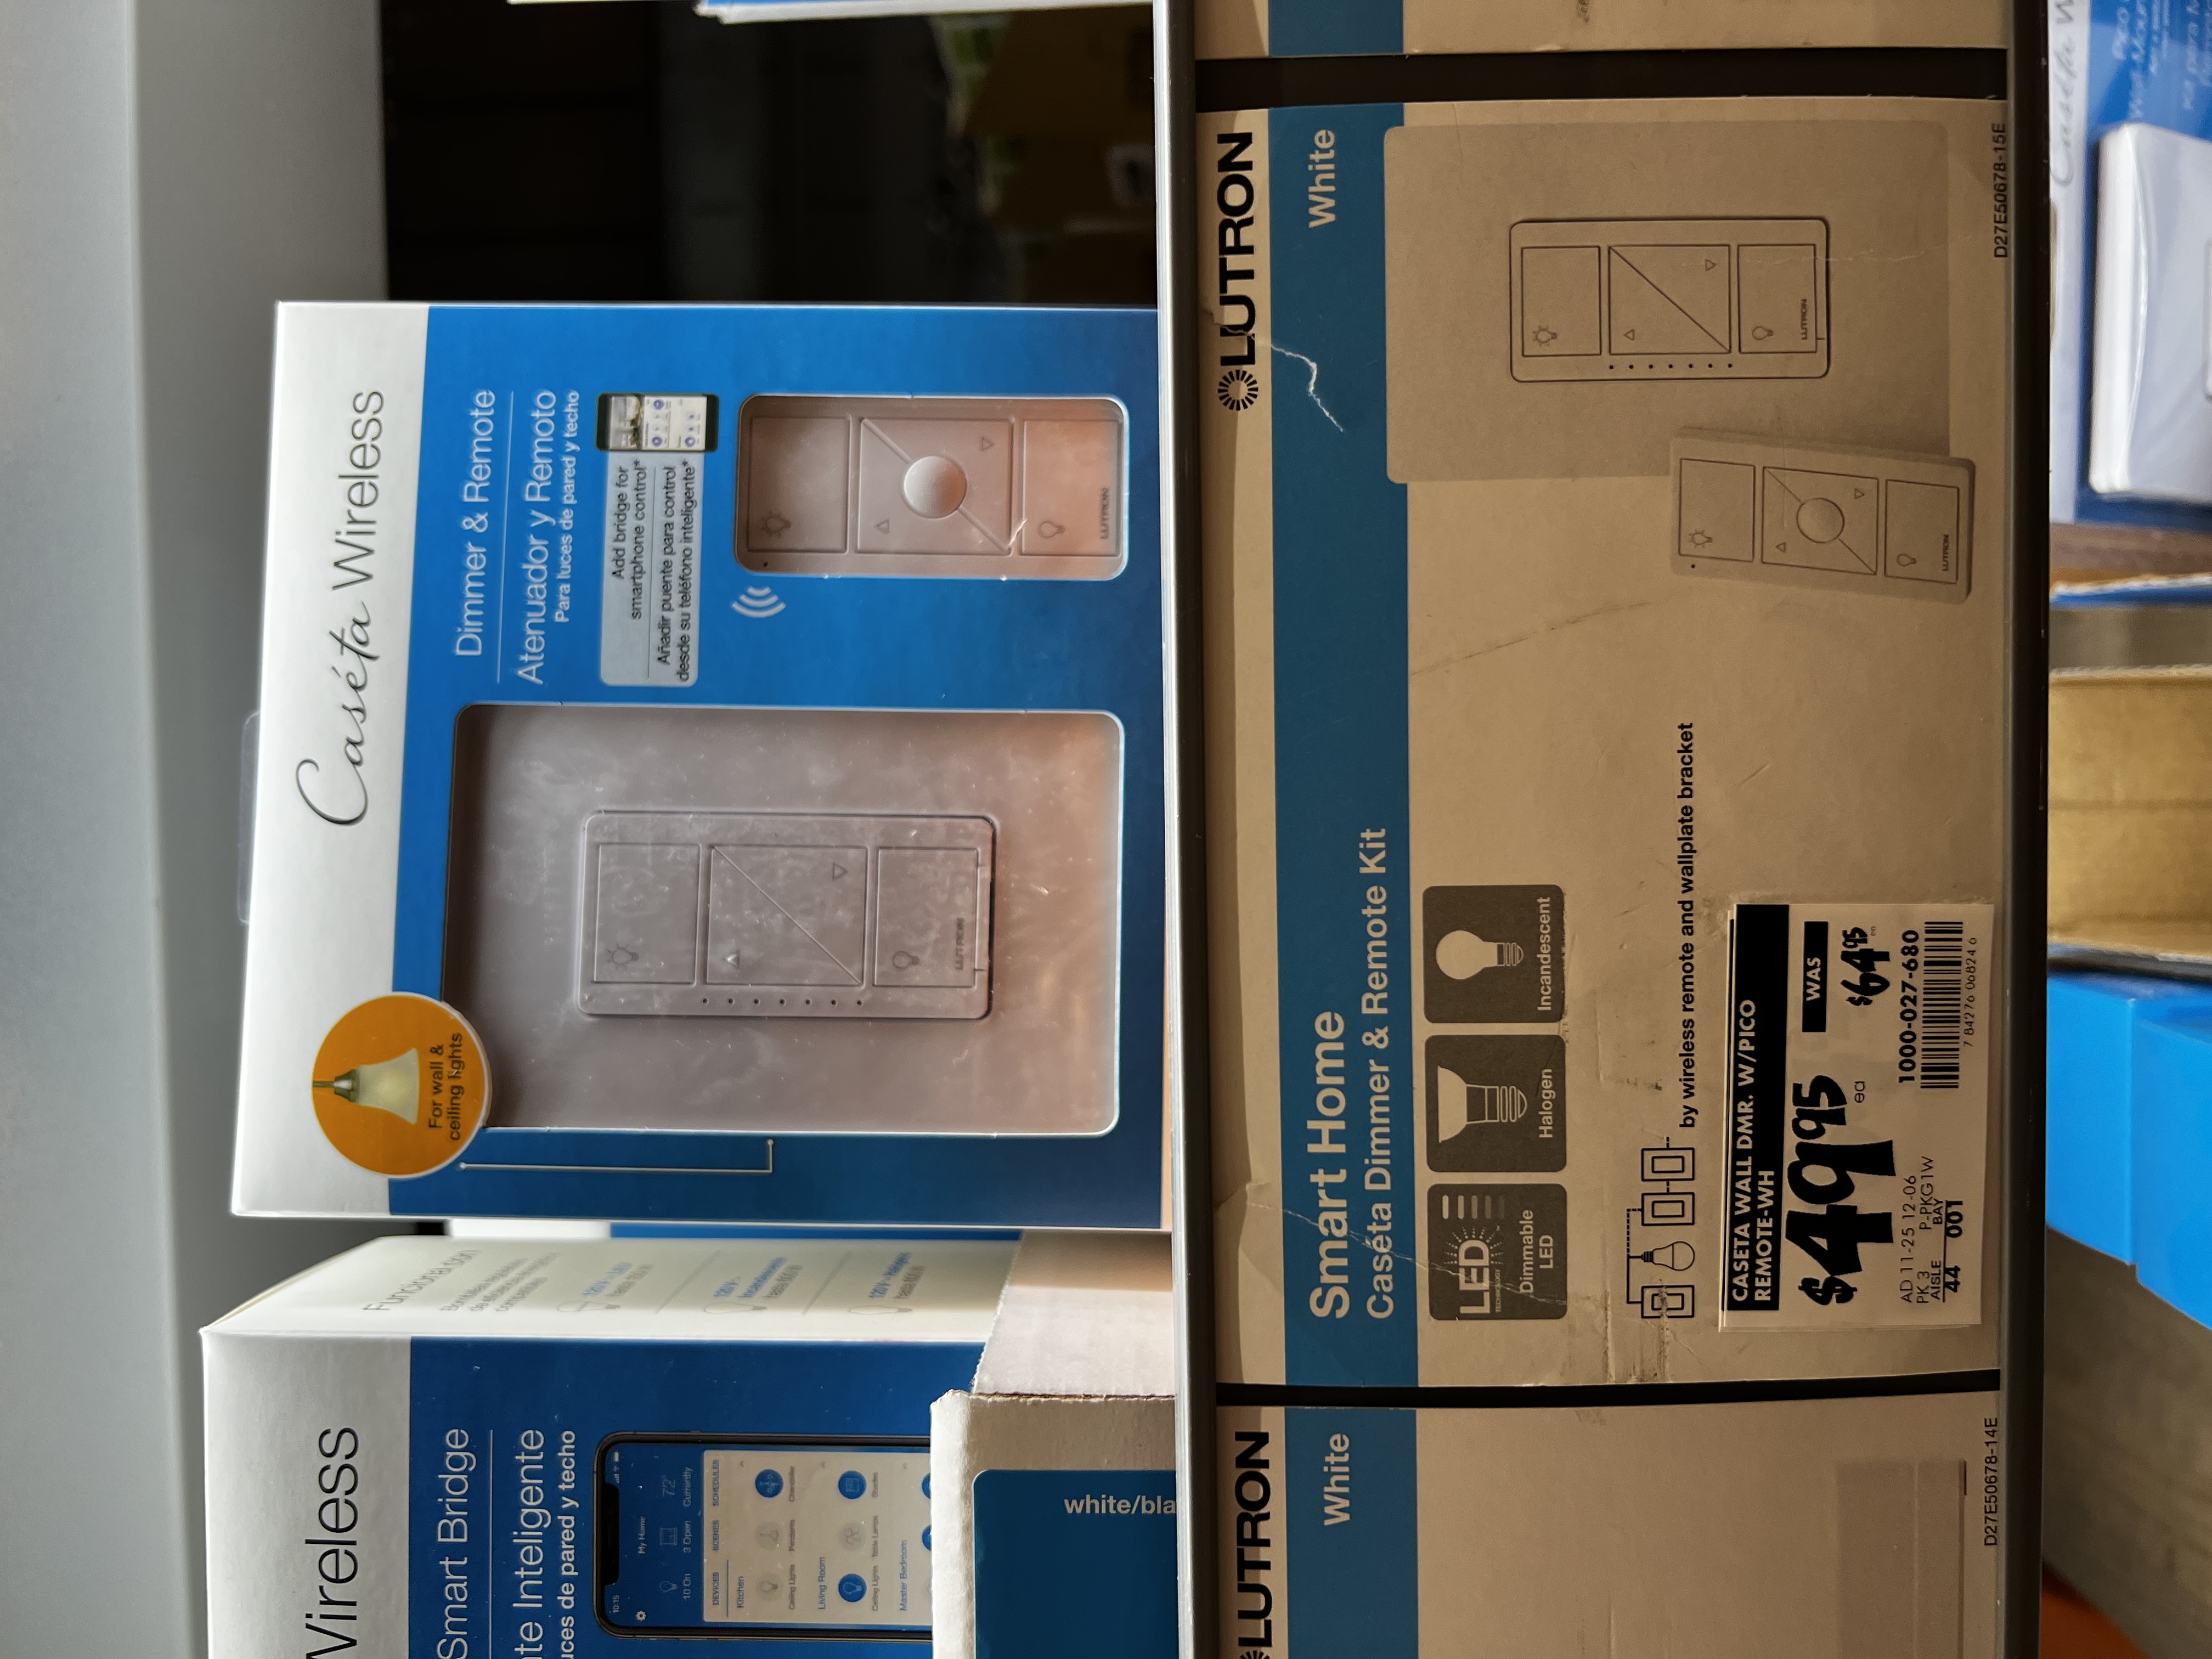 Lutron Caseta Smart Dimmer Switch with Pico Remote (In Store Only) $49.95